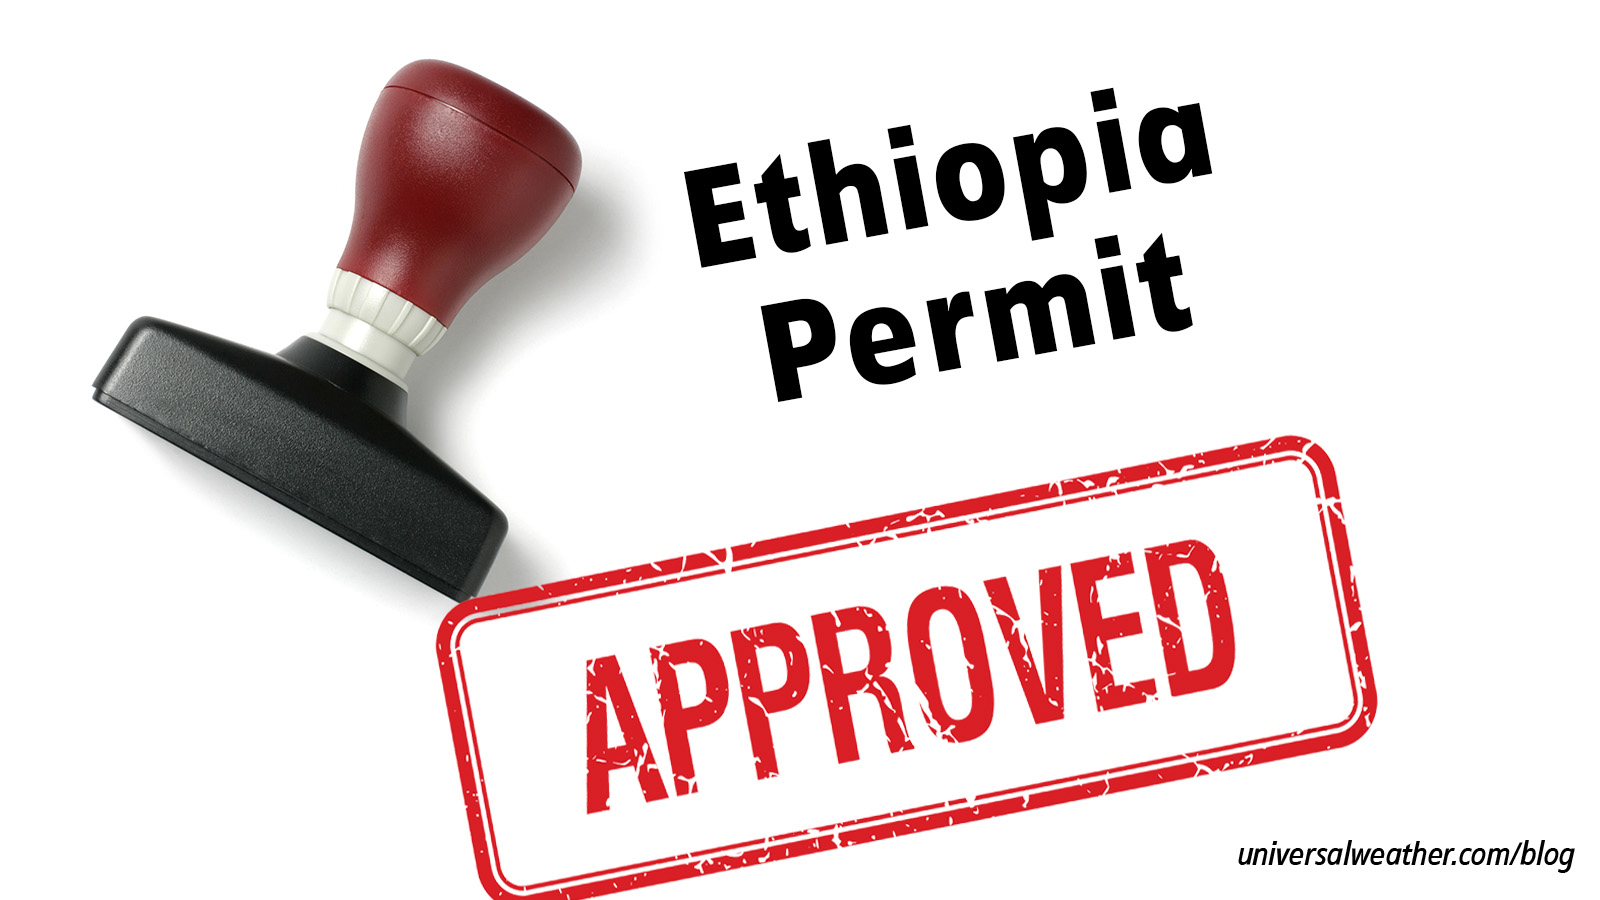 Business Aircraft Ops to Ethiopia: Permits, Slots & PPRs